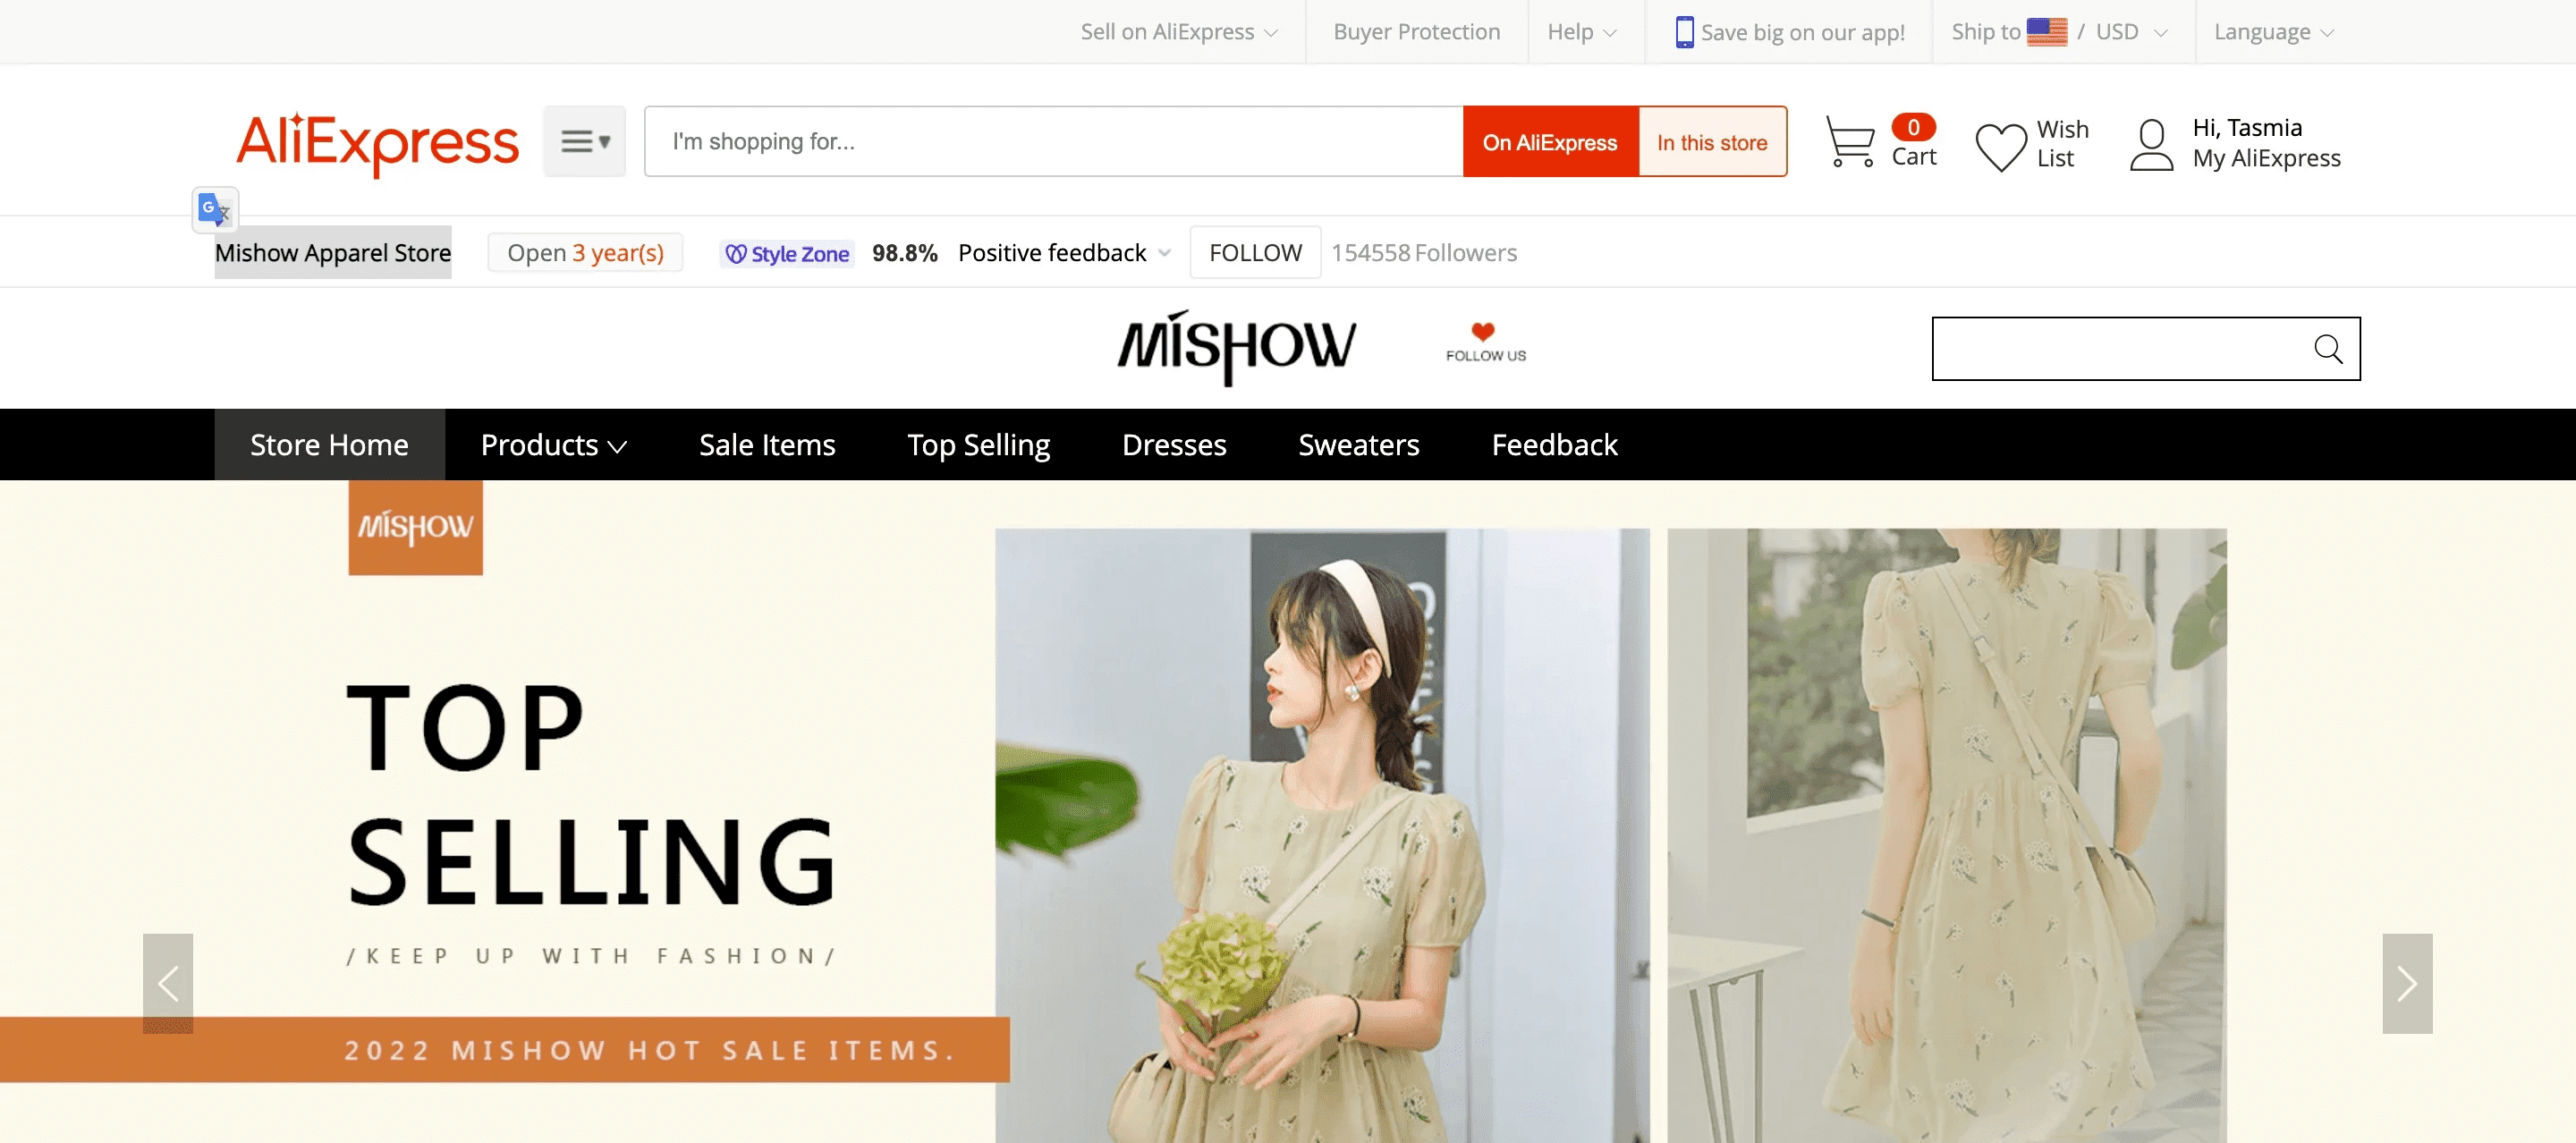 Mishow Apparel Store